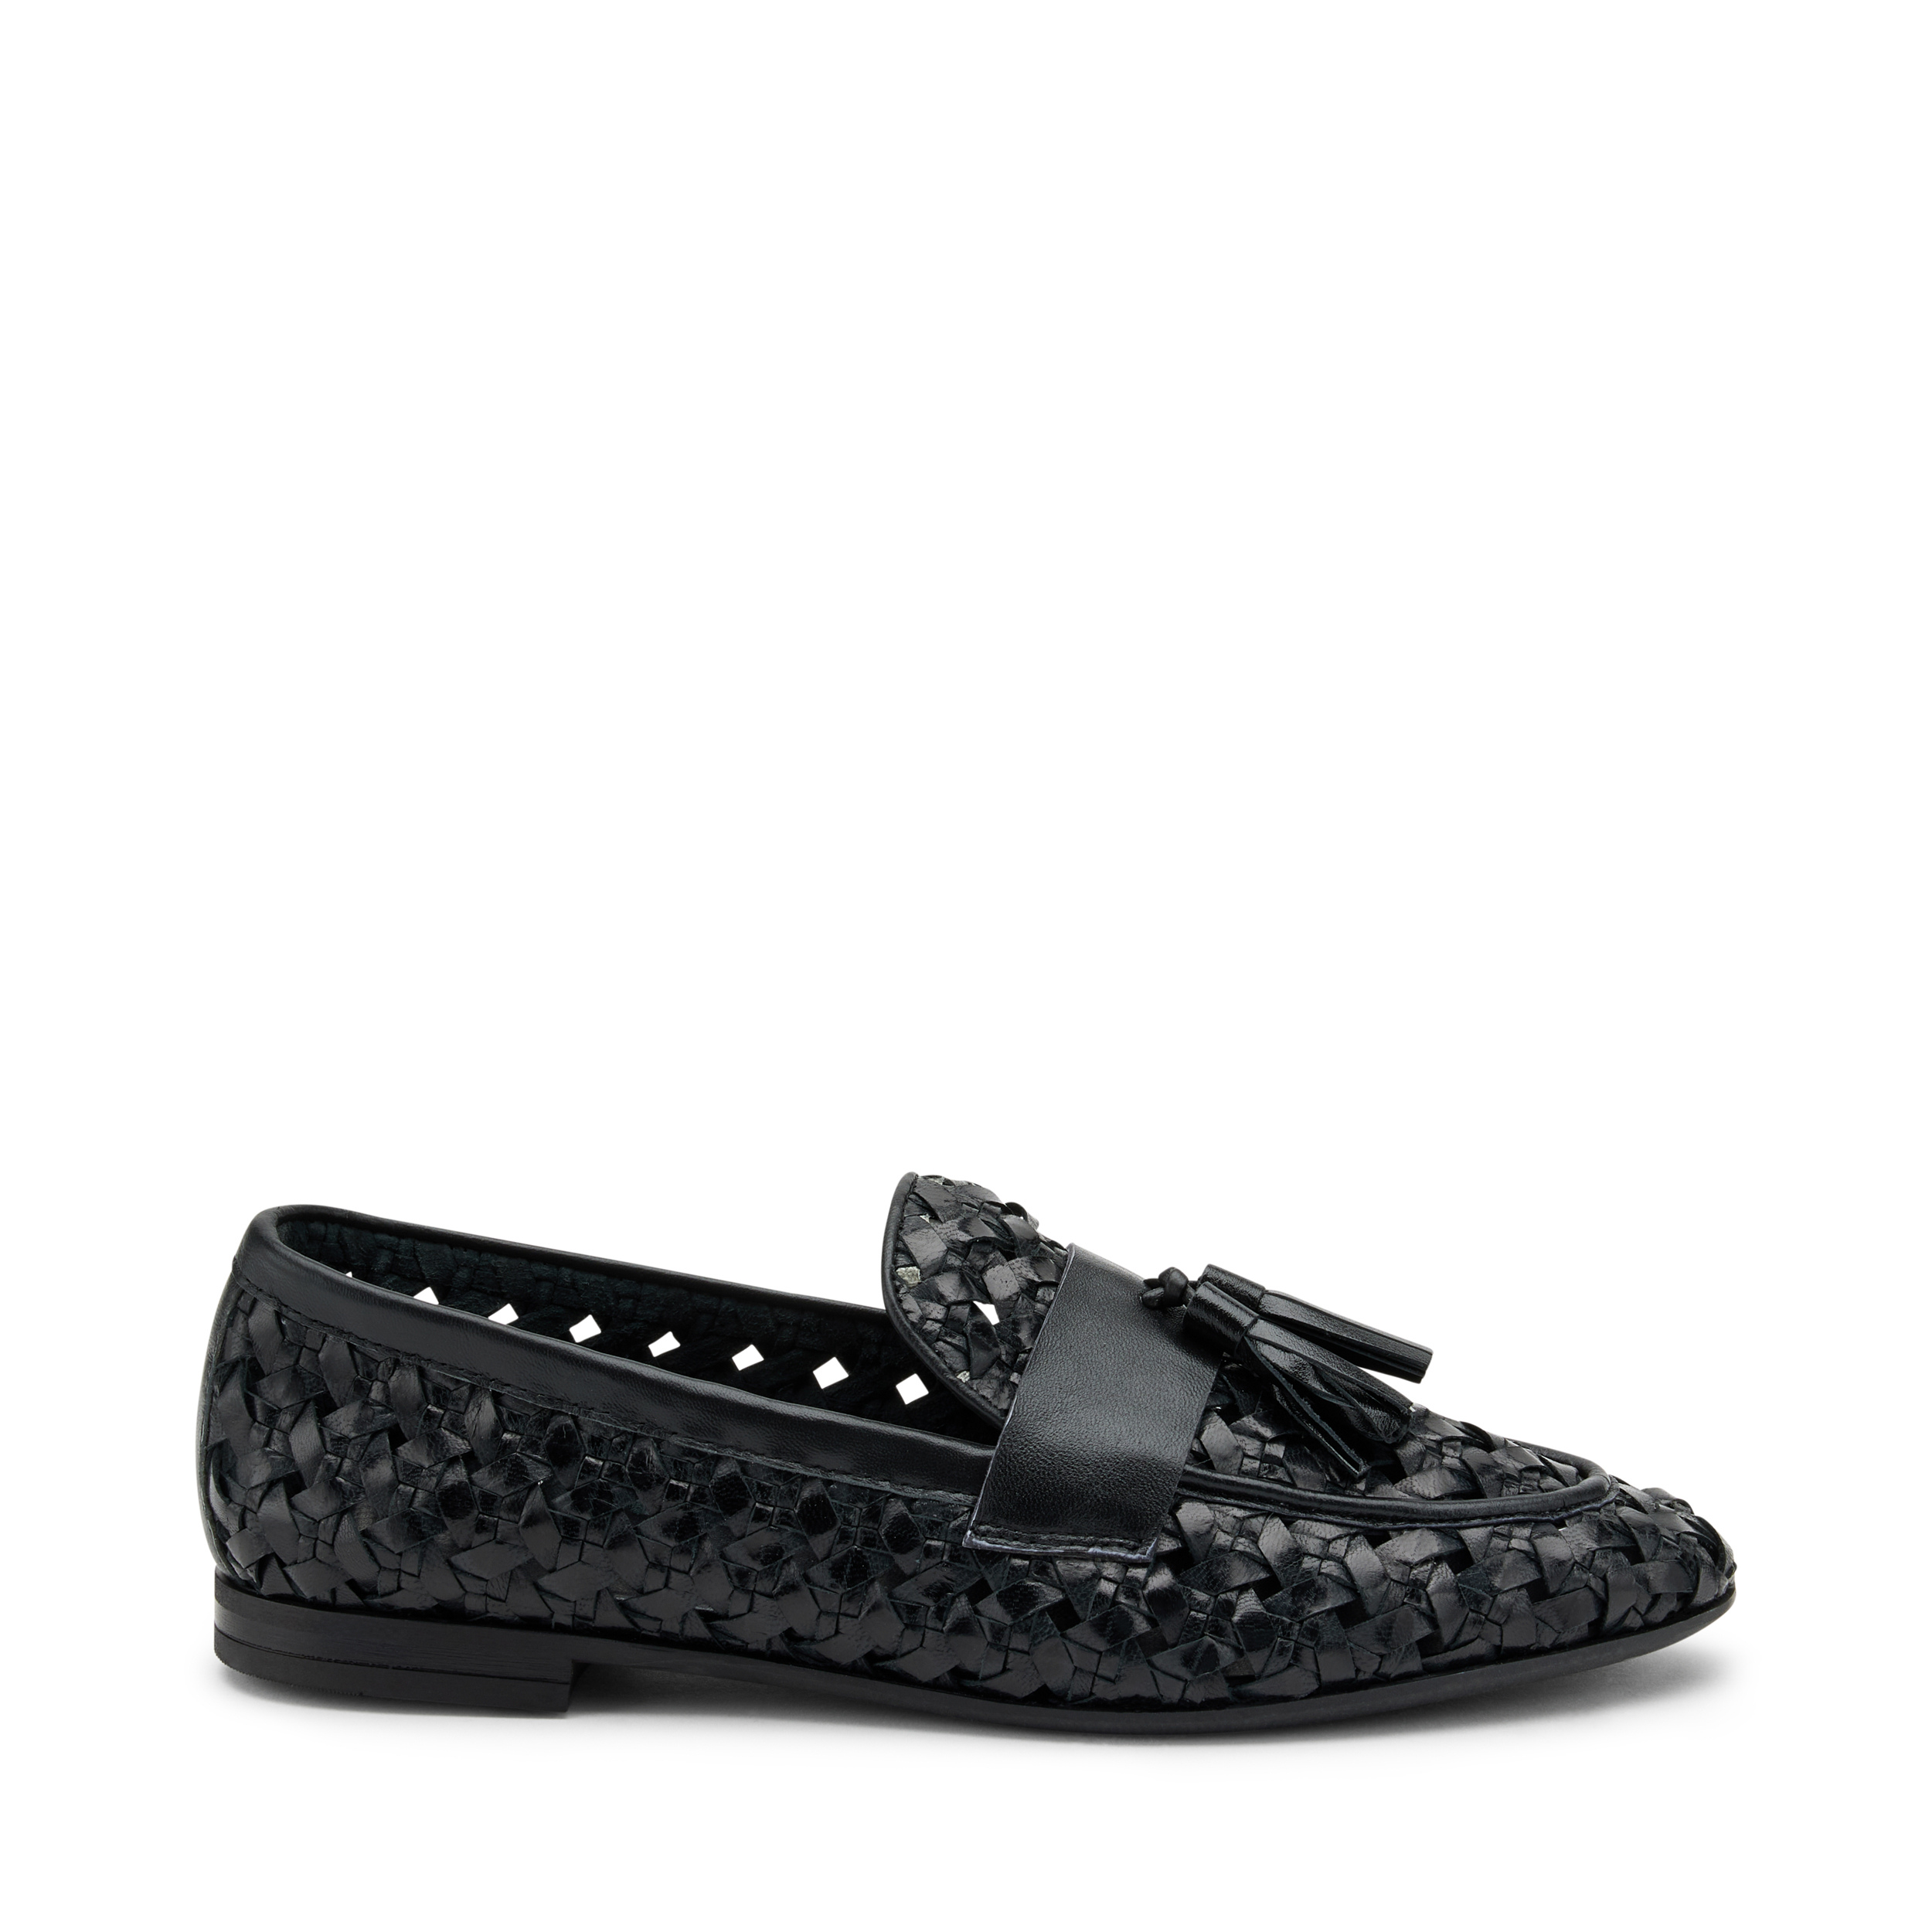 Woven leather loafers with tassel detail, Col. Black | Frau